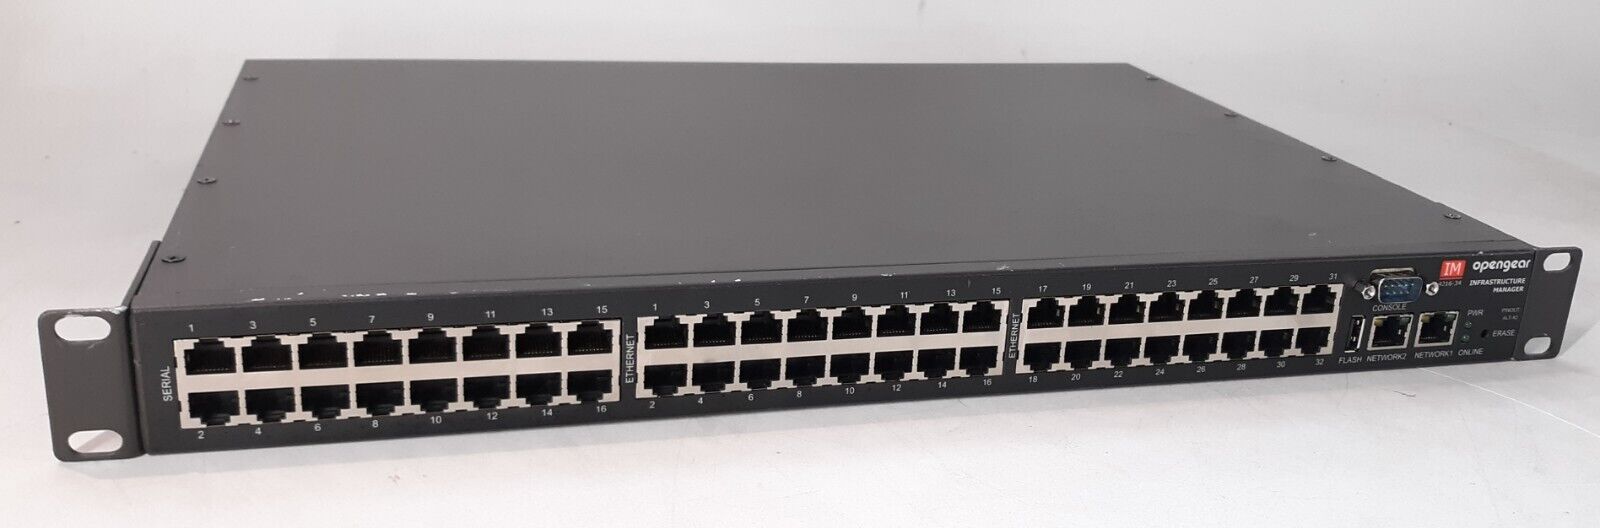 OpenGear IM4216-34-DAC-X2 48-Port Infrastructure Manager Switch + Ears + Cords